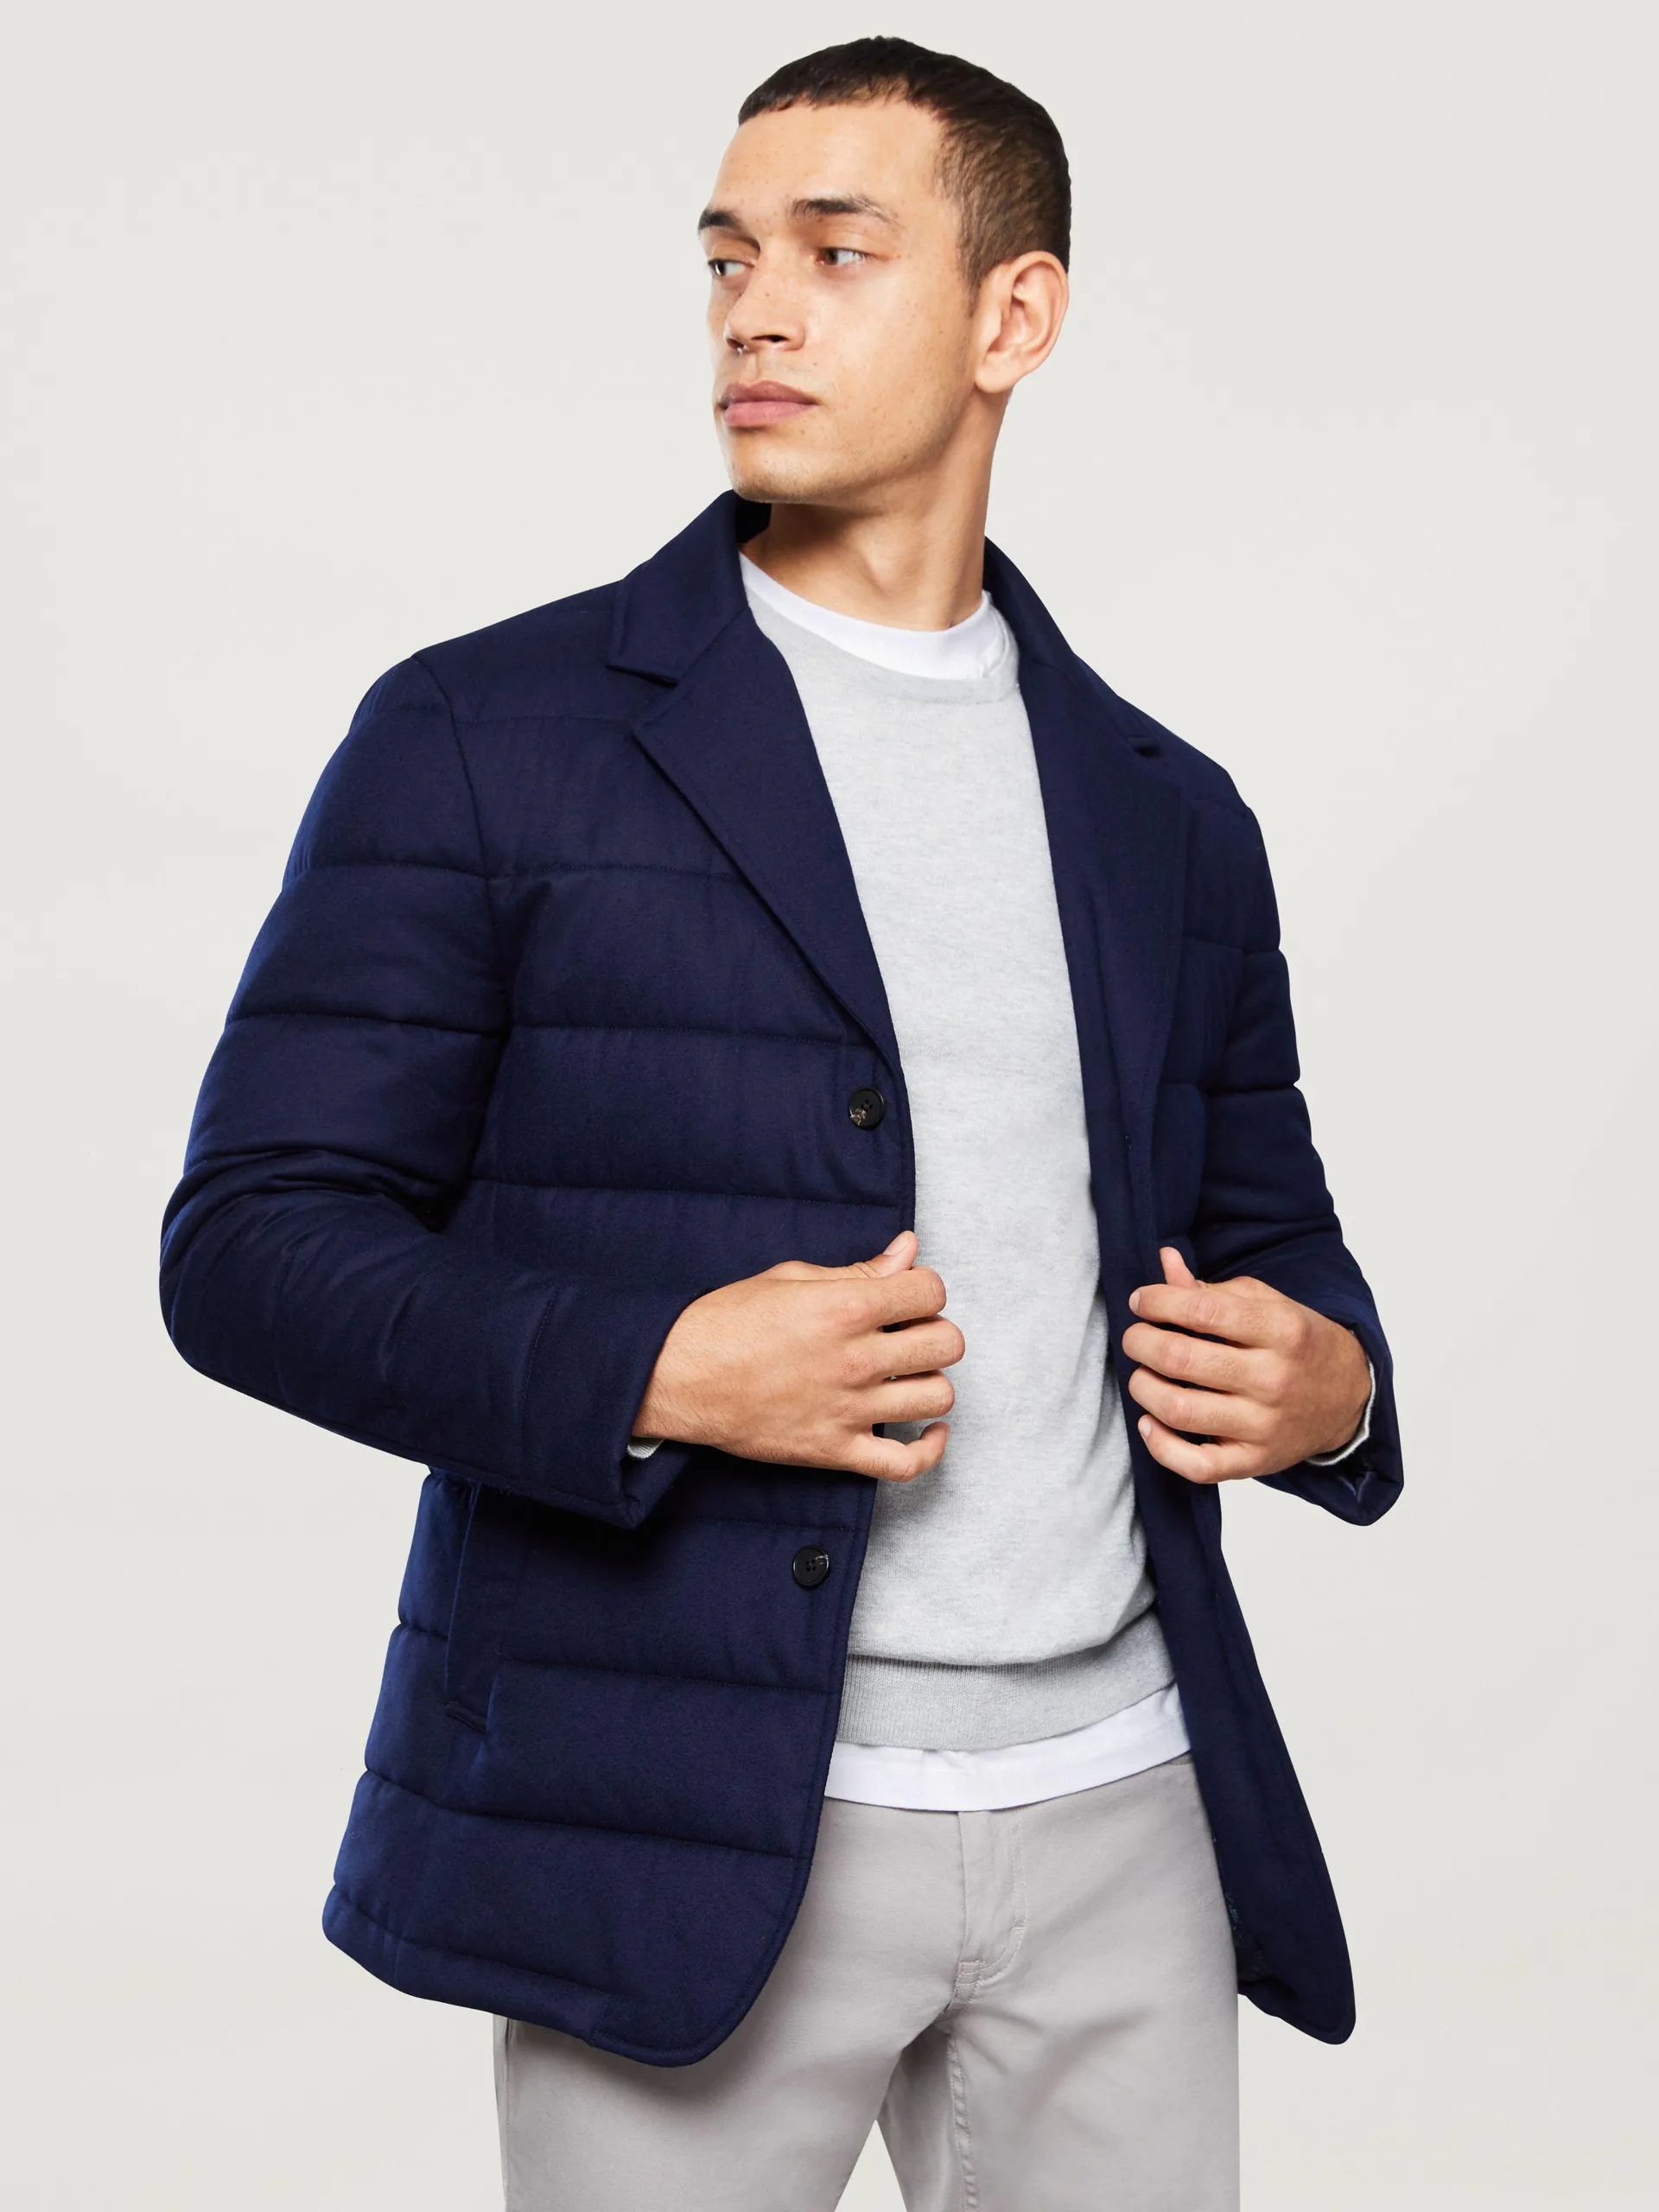 Bocelli Slim Fit Quilted Jacket in Navy Wool